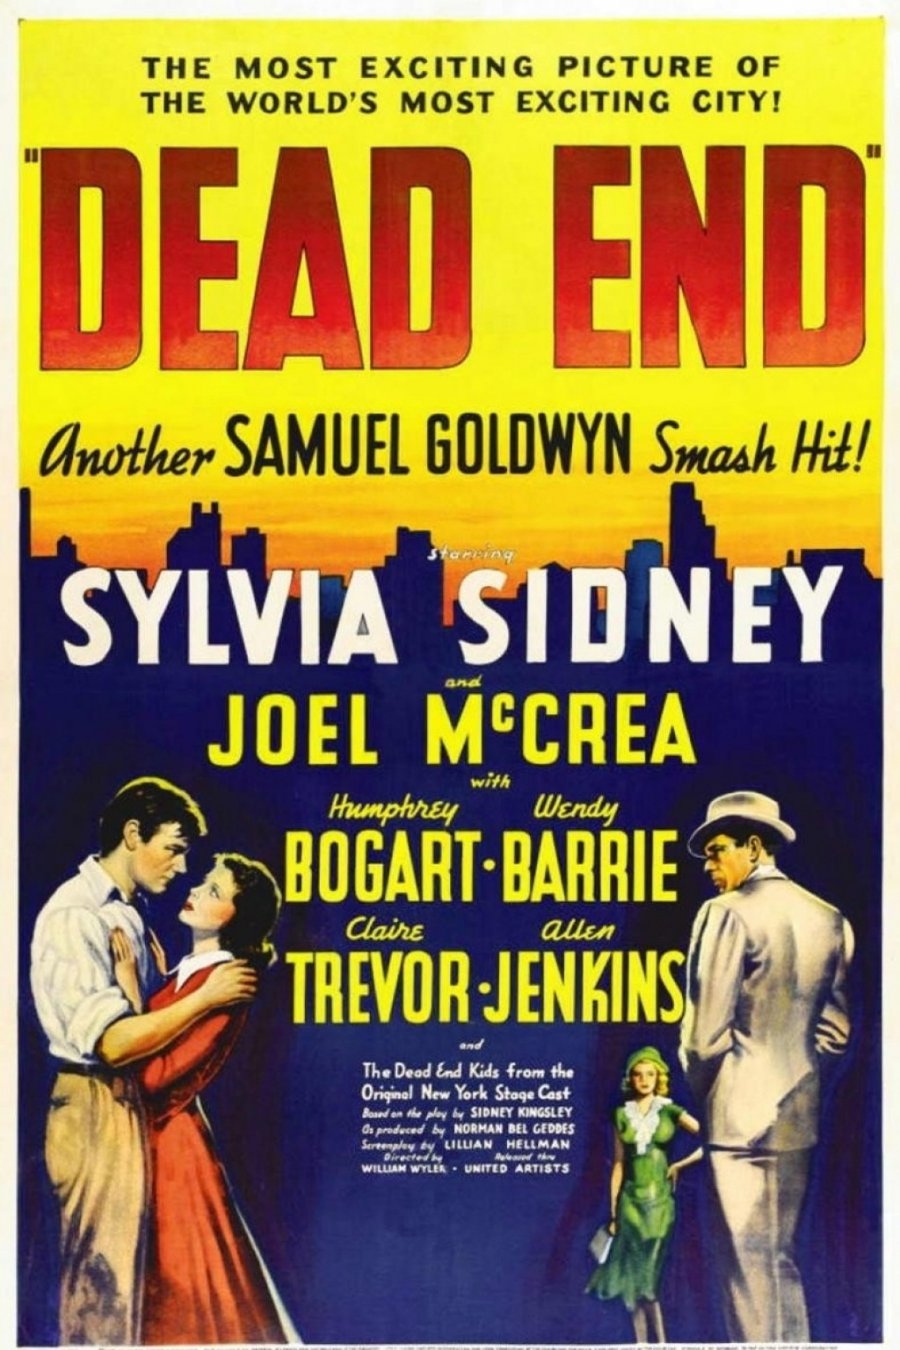 Poster of the movie Dead End